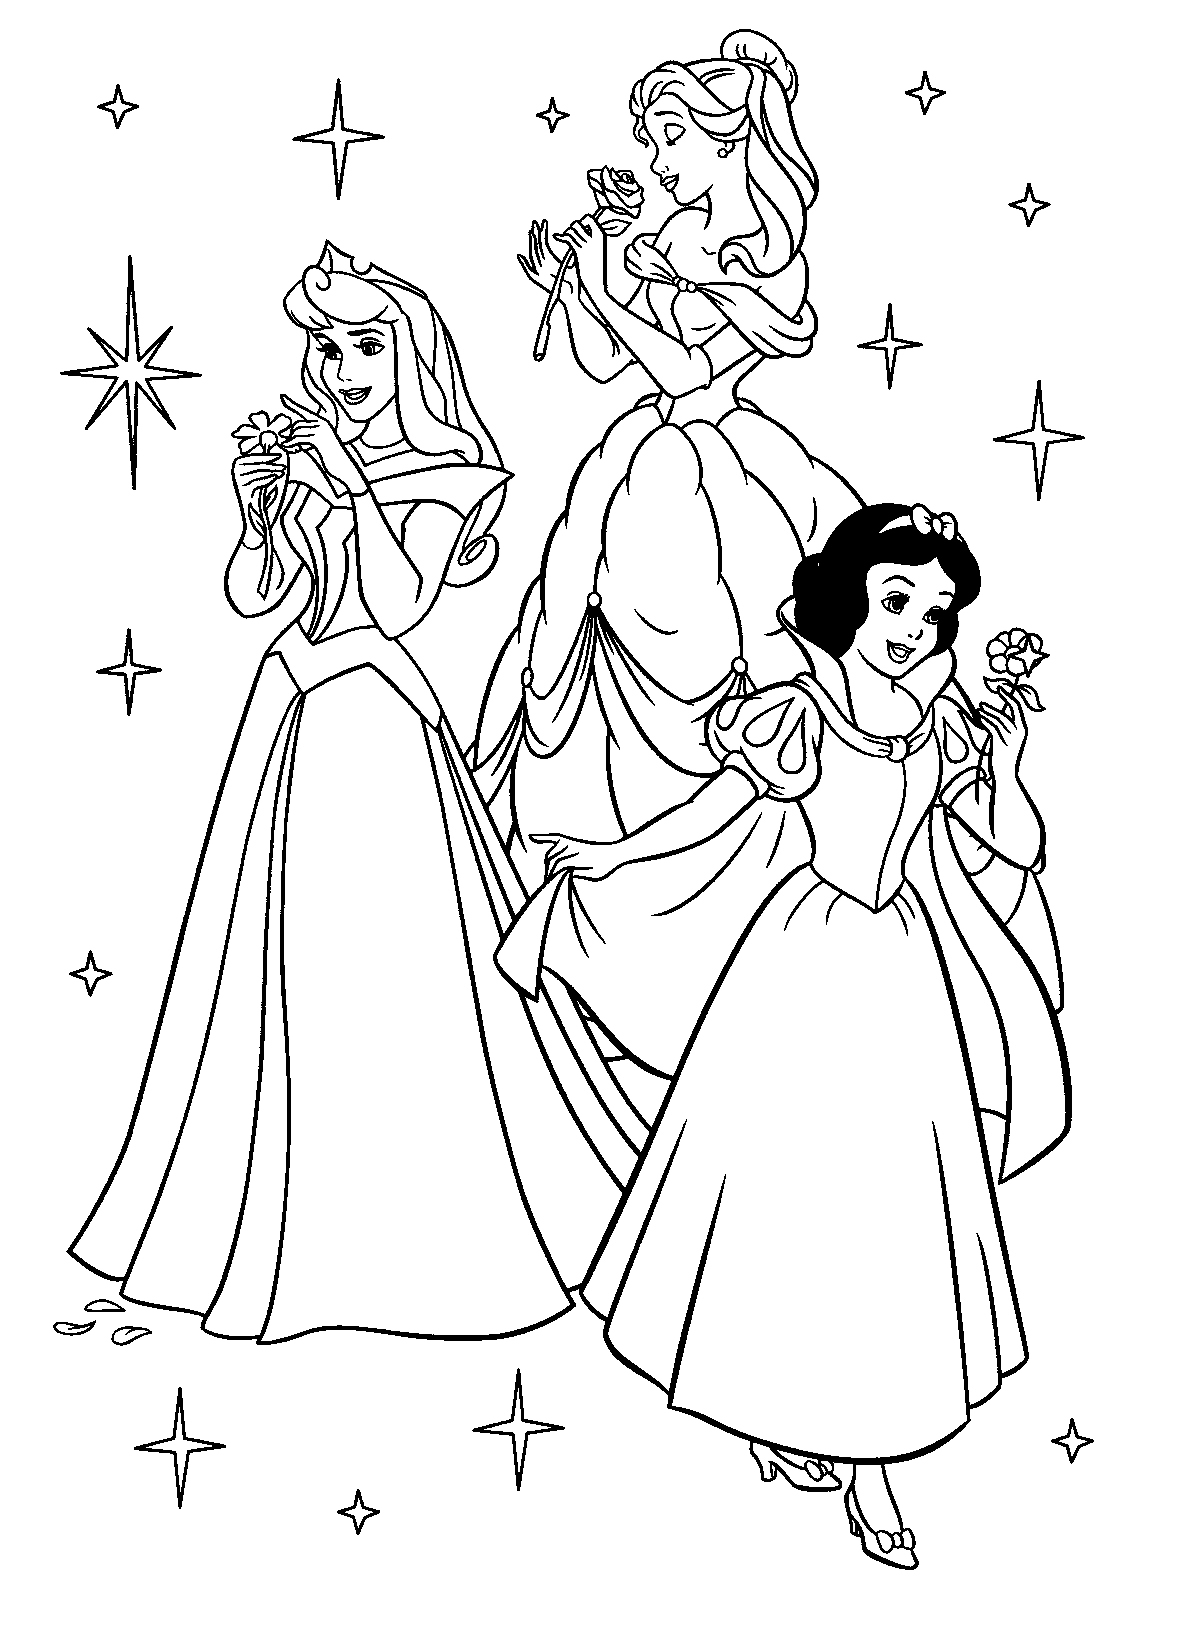 Cinderella Coloring Pages Valentines   Coloring Pages For All Ages ...